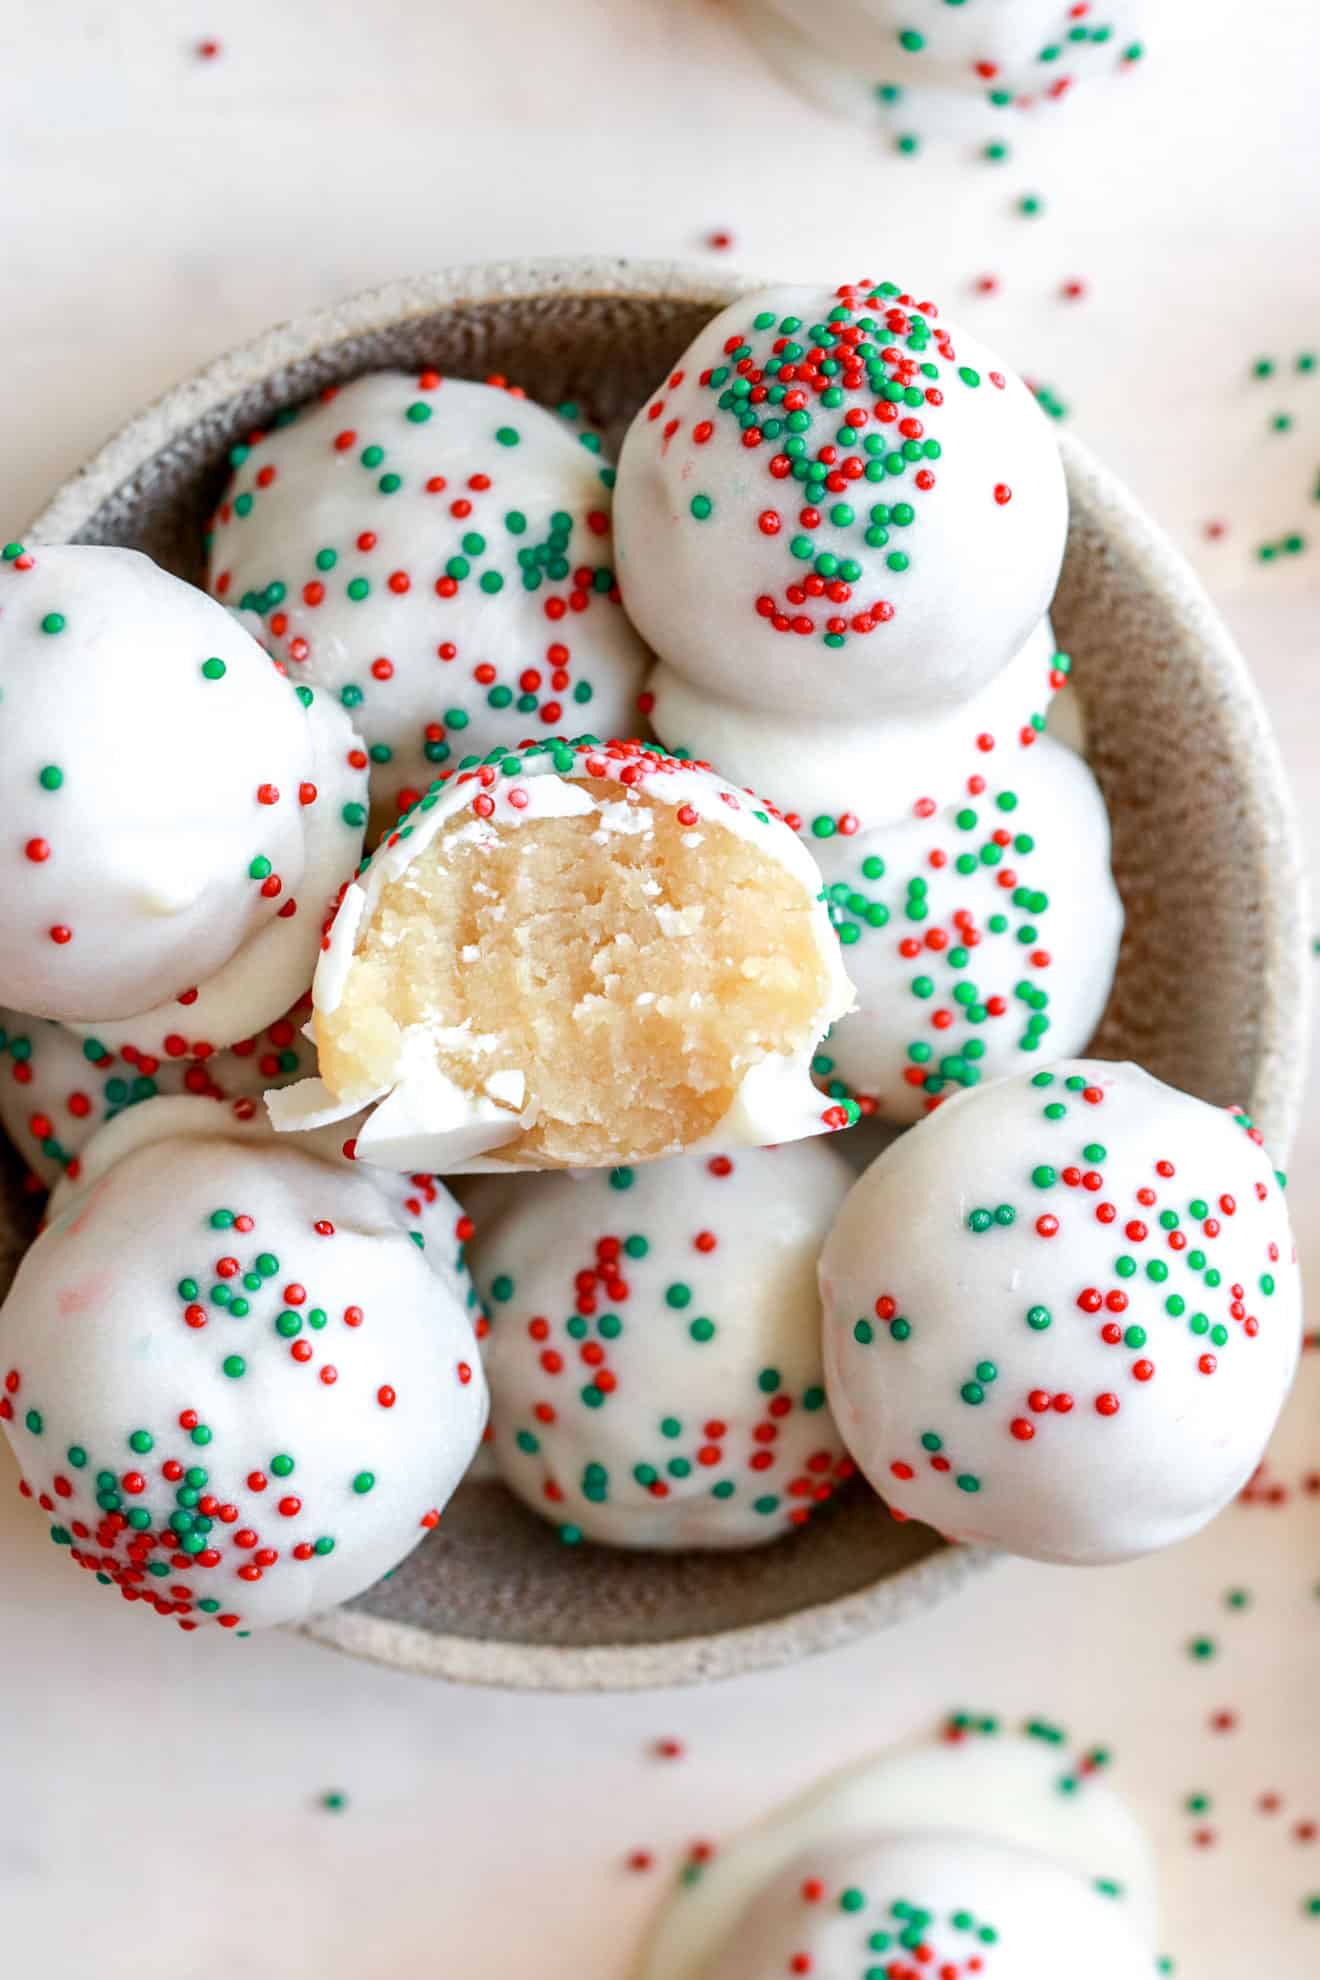 overhead view of a bowl filled with sugar cookie truffles. one truffle has a bite taken out of it. the bowl sites on a white counter with sprinkles scattered.